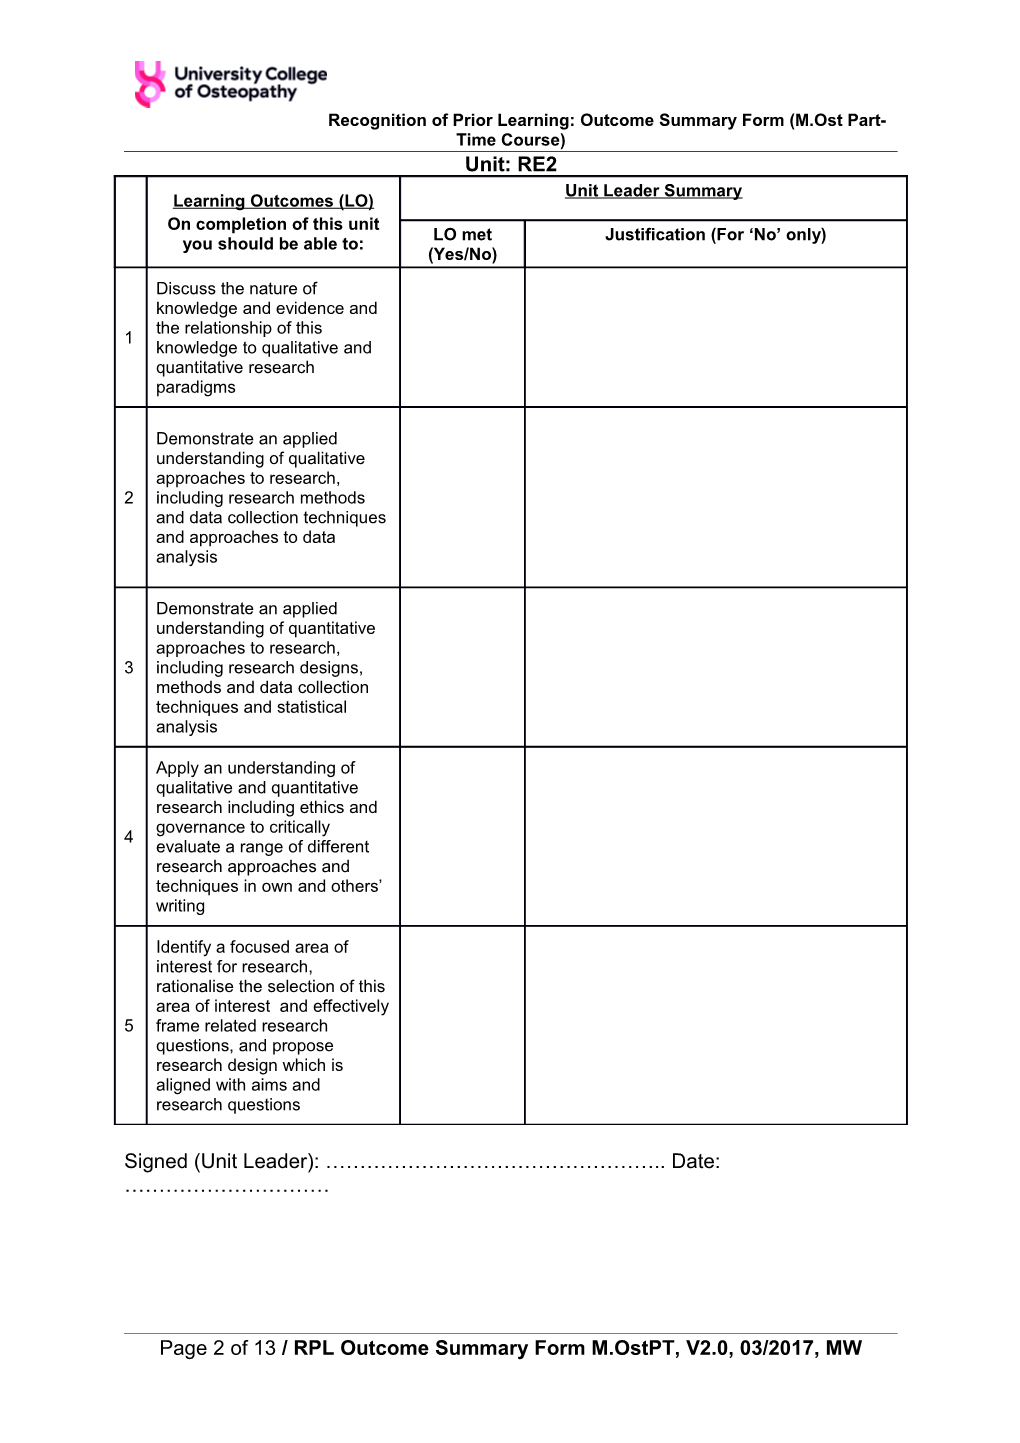 Recognition of Prior Learning: Outcome Summary Form (M.Ost Part-Time Course)